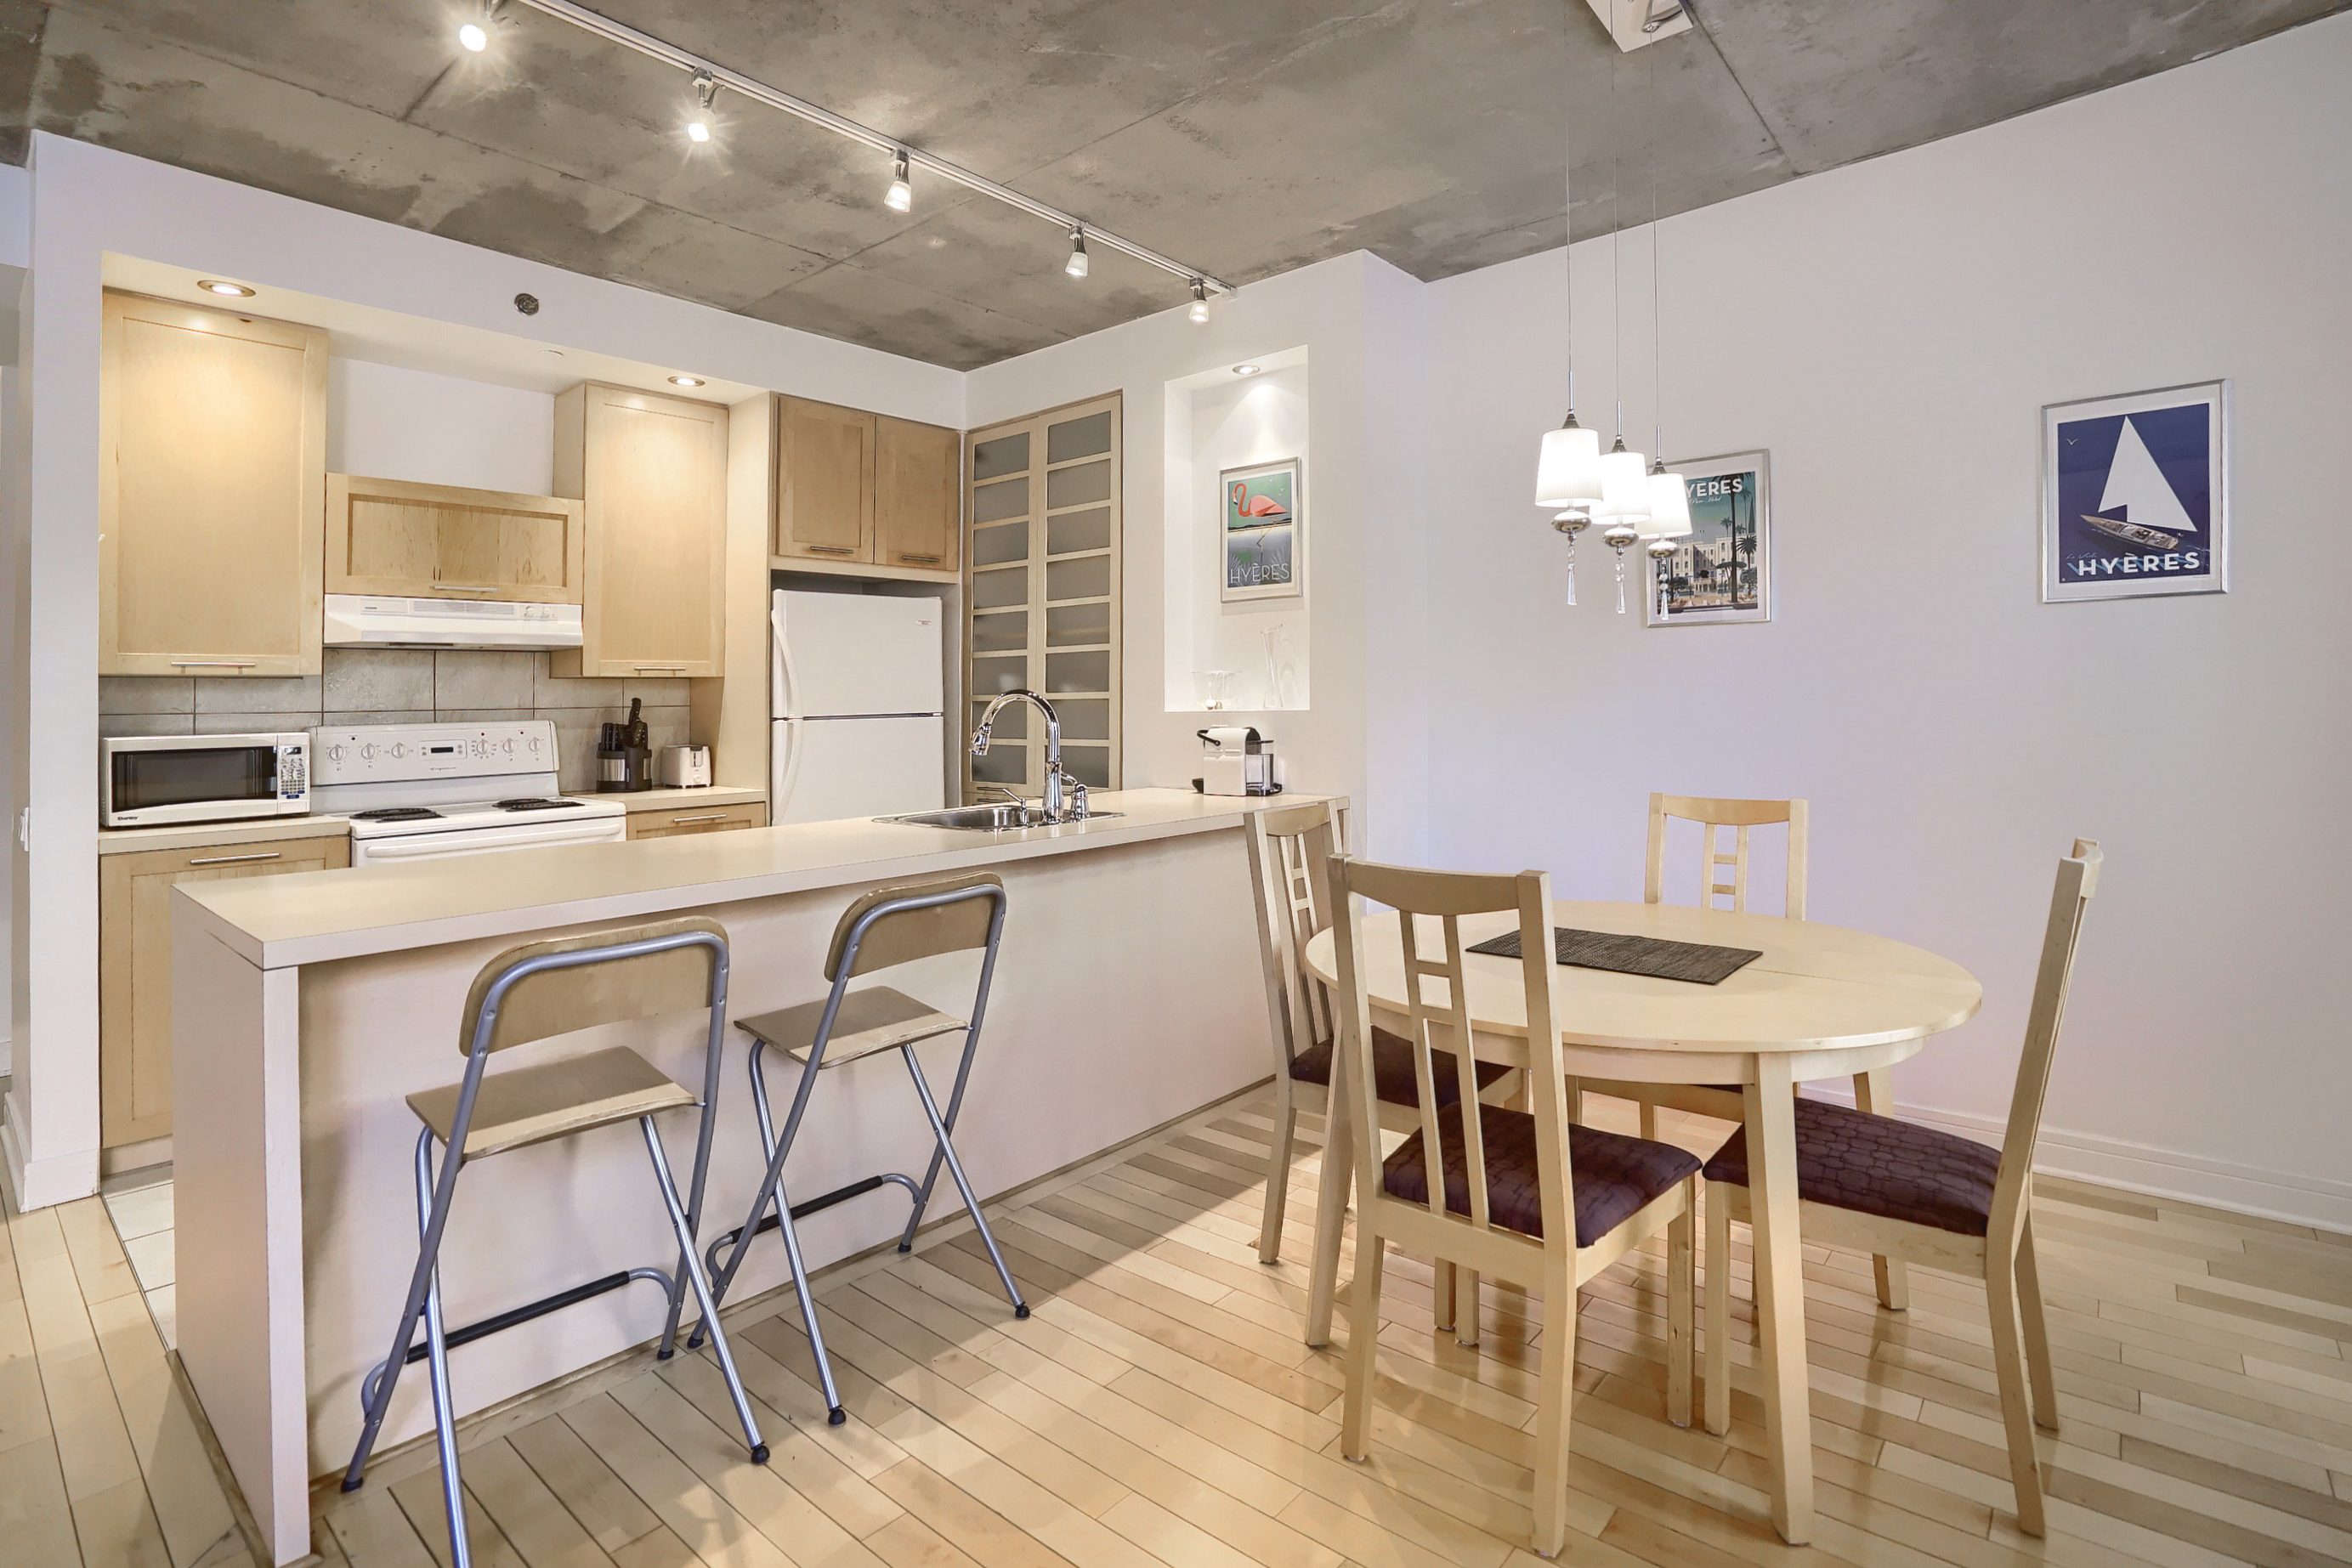 View of the dining table and four wooden chairs, unique stainless-steel ceiling lighting, white walls with light wood floor. Our goal is to provide corporate housing in Montreal that exceeds all your expectations